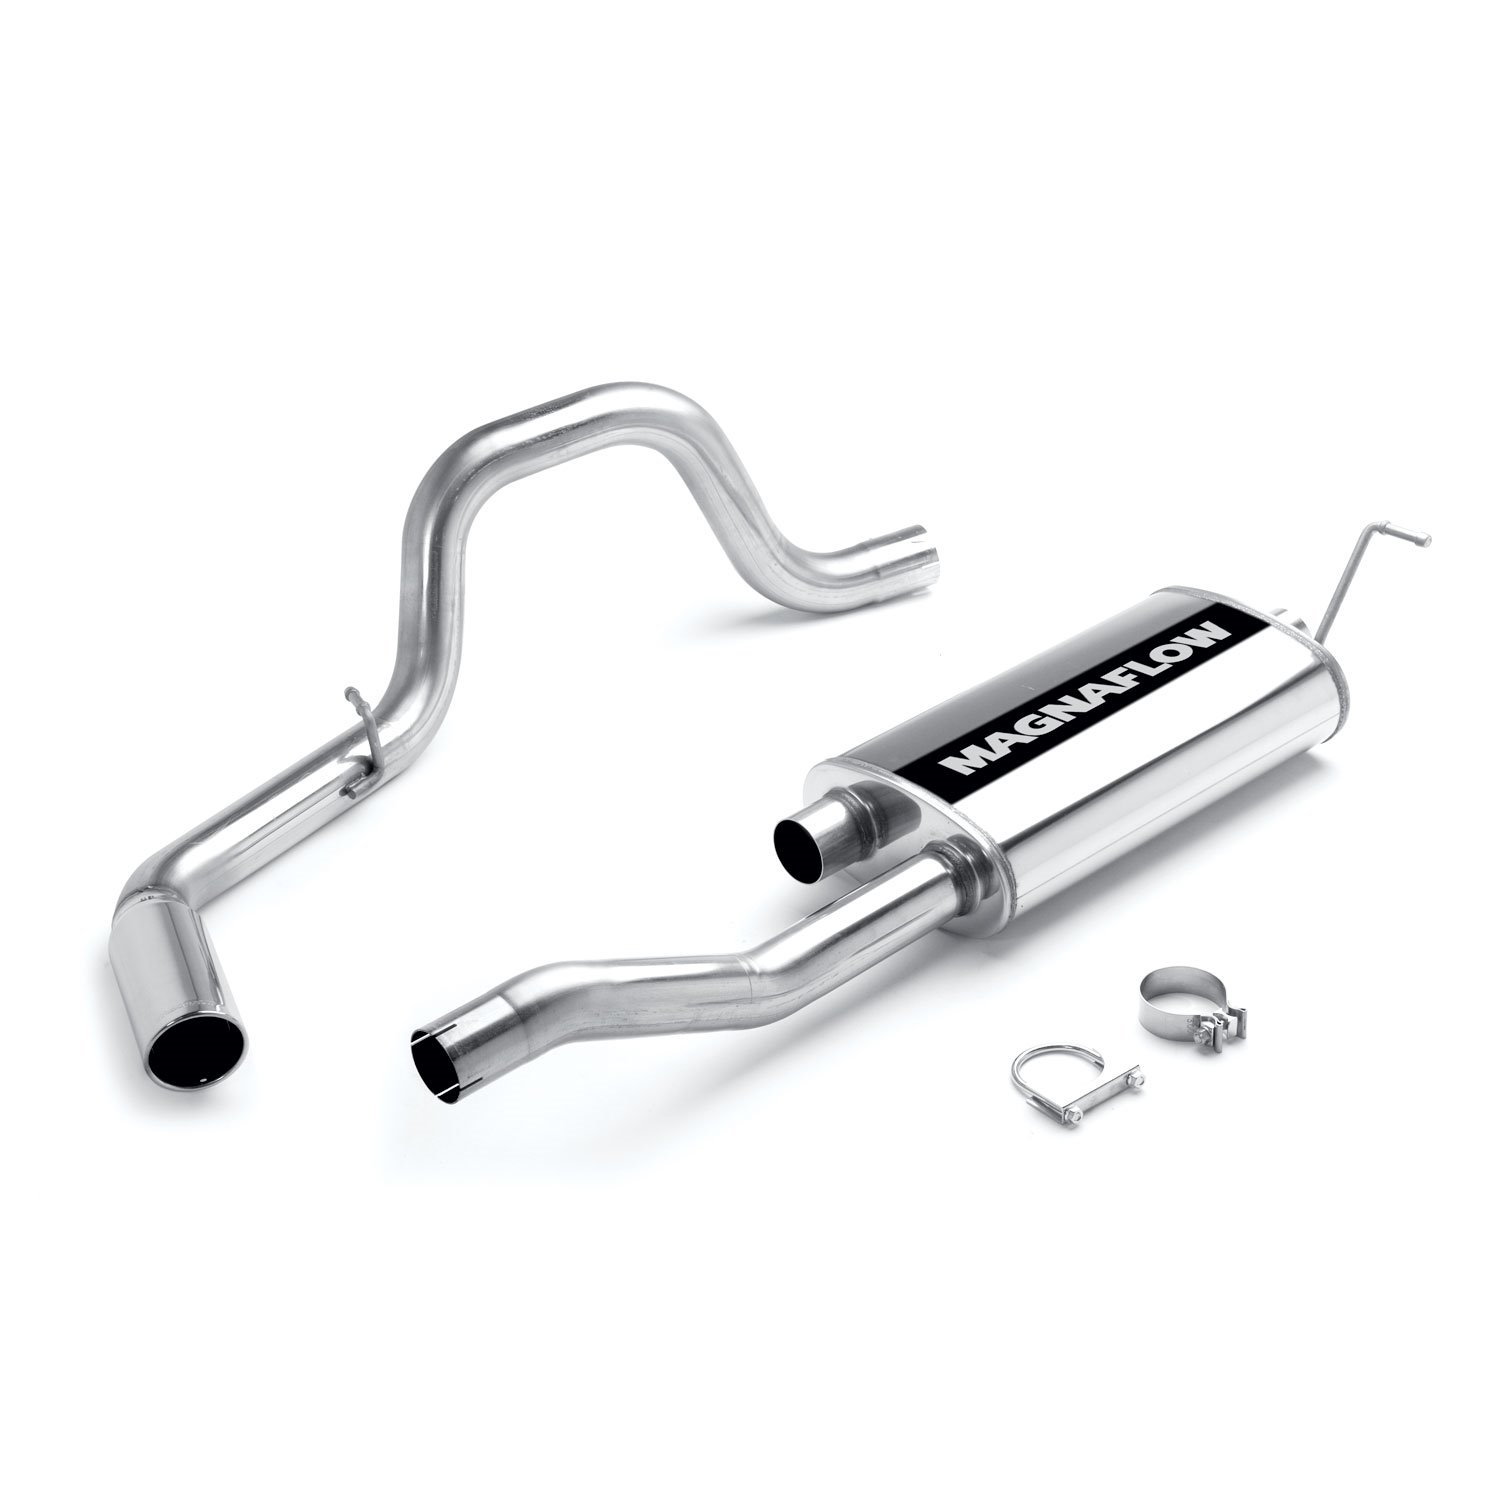 MF Series Cat-Back Exhaust System 2002-06 Chevy Avalanche 2500 8.1L V8